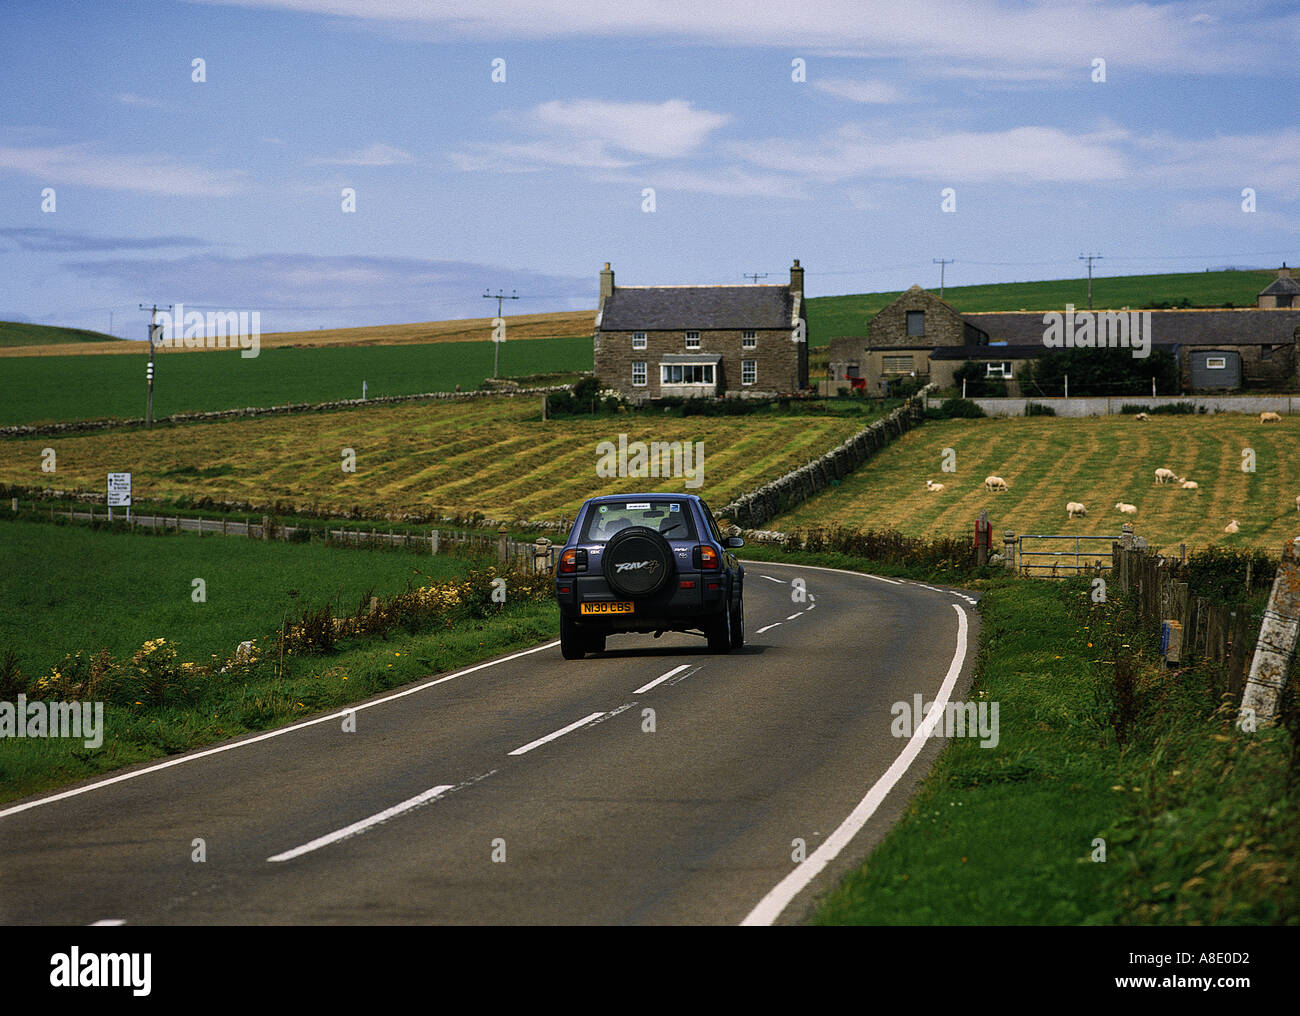 dh Voy SANDWICK ORKNEY Car road fields and farm house scotland driving 4x4 country uk travelling Stock Photo